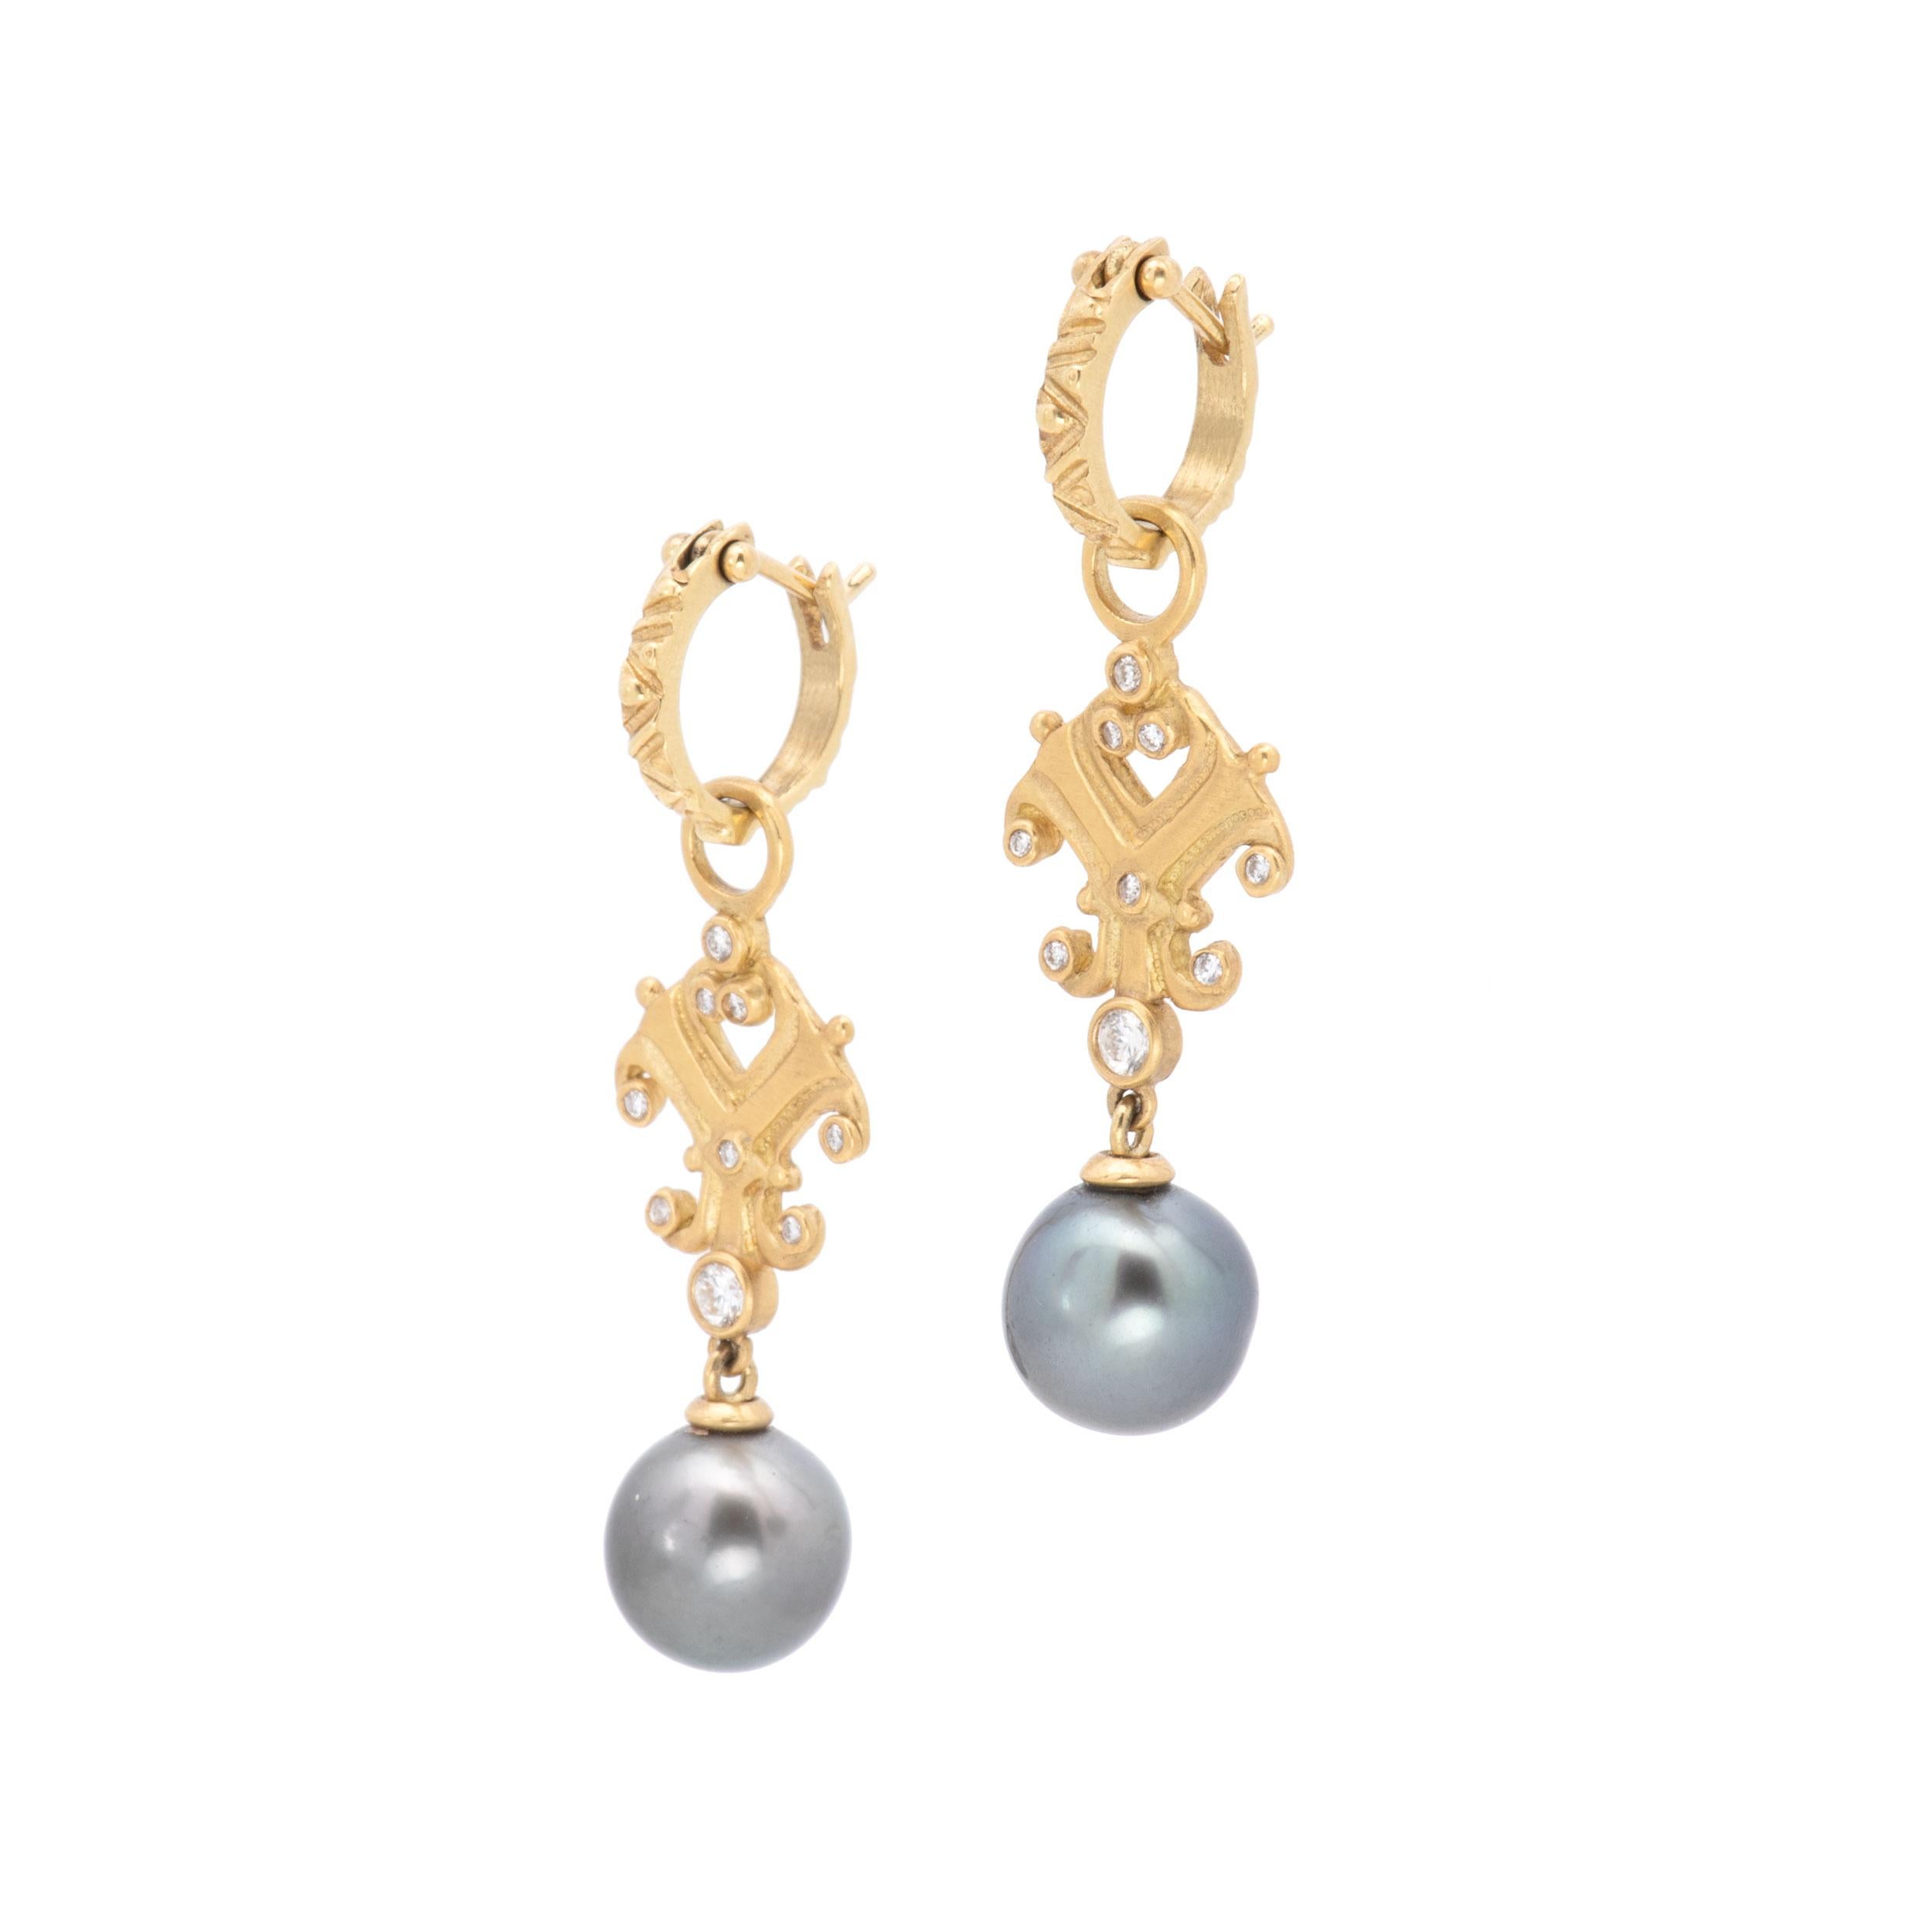 Treasures from the sea... 11-11.5mm cultured Tahitian Pearl Drop Scroll Earrings twinkle with white diamonds and are hand crafted in our studio of 18k gold. Capped in 18k gold, grey-black Tahitian pearls are suspended from graceful gold scrolls set